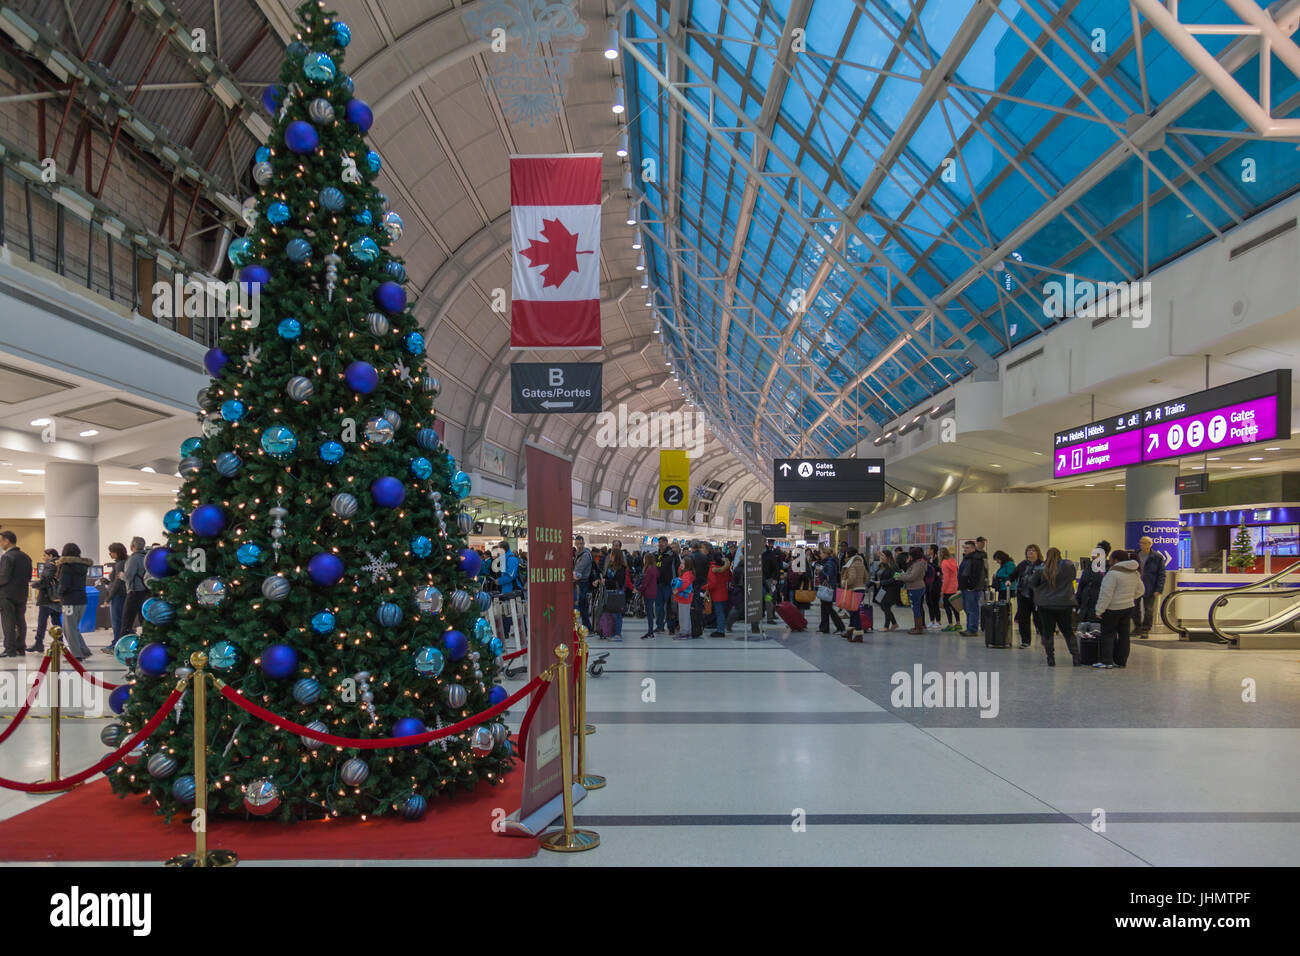 Christmas tree lighting up in Toronto Pearson Airport. Pearson Airport is the largest and busiest airport in Canada Stock Photo